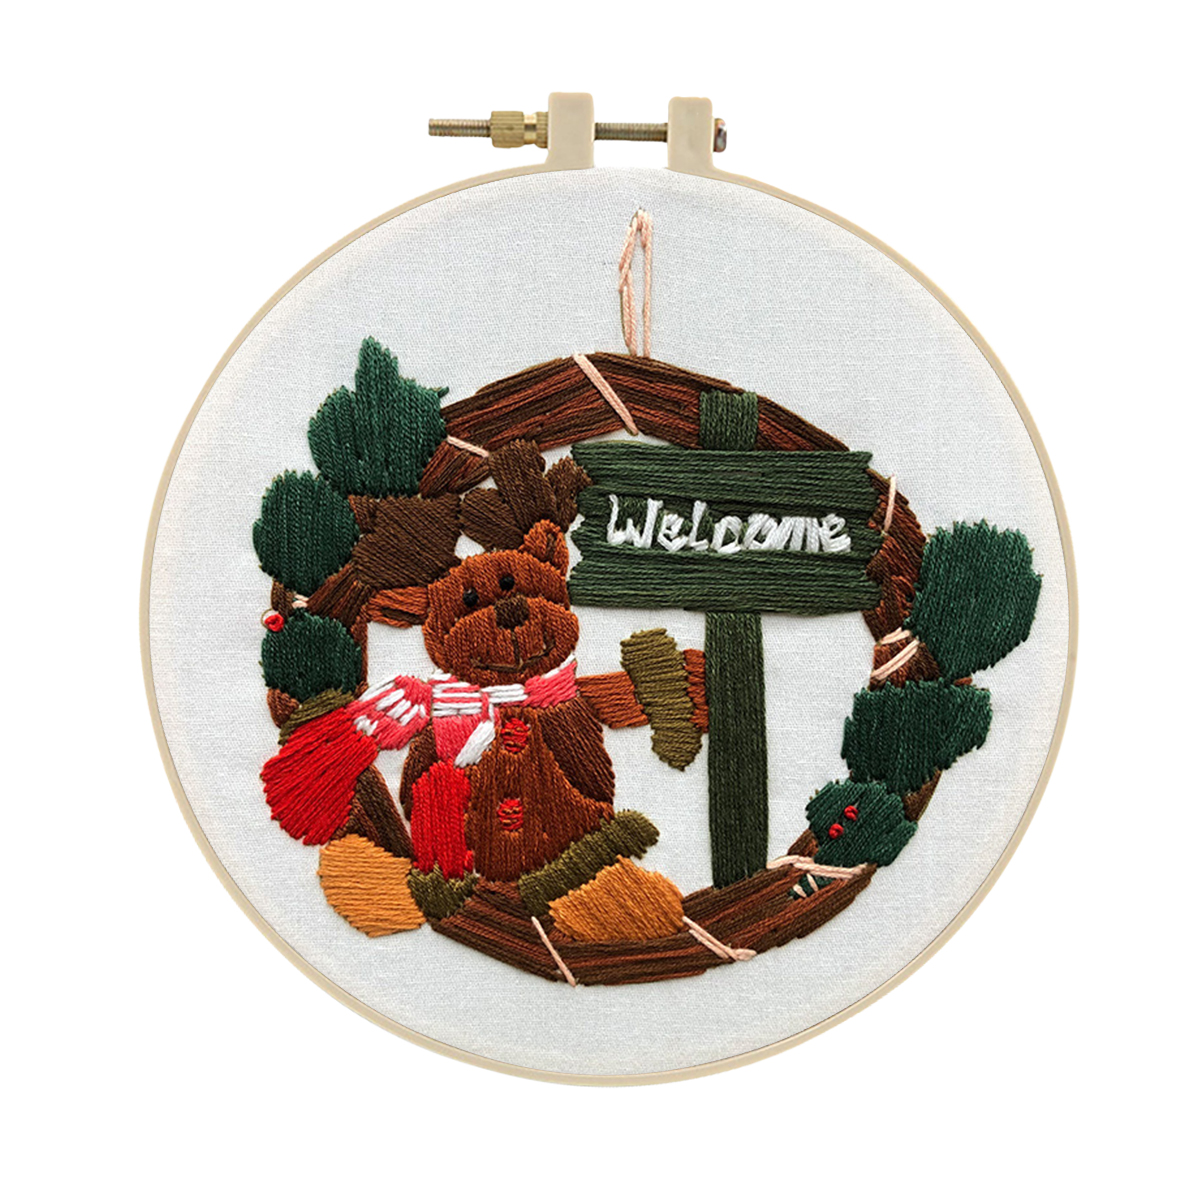 Handmade Christmas Embroidery Kit Cross stitch kit for Adult - Bears Welcome Pattern